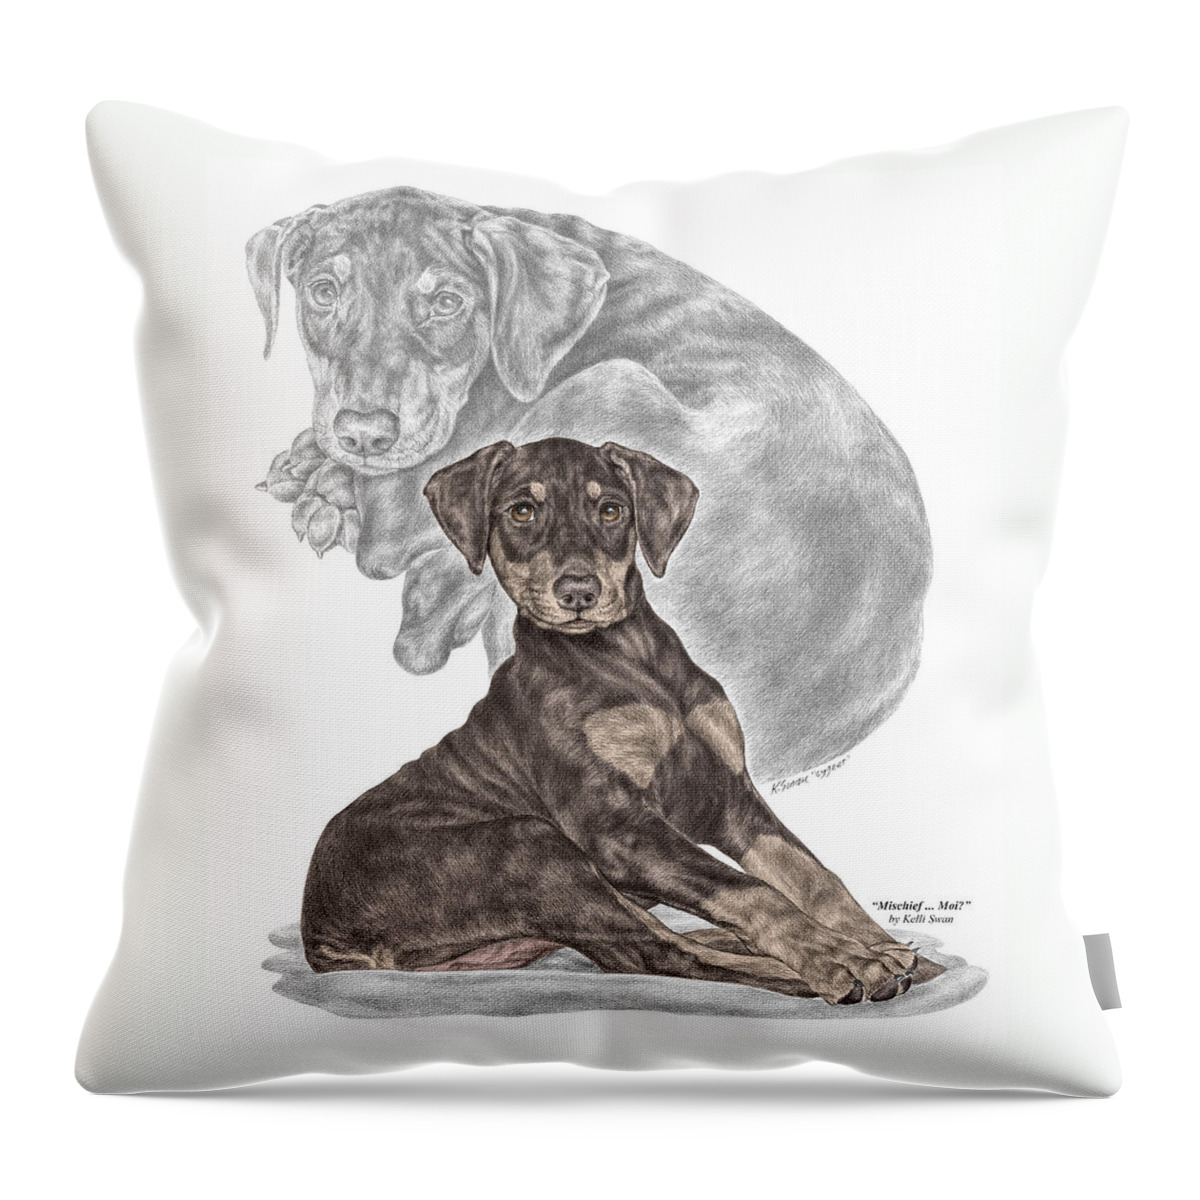 Red Doberman Throw Pillow featuring the drawing Mischief ... Moi? - Doberman Pinscher Puppy - color tinted by Kelli Swan